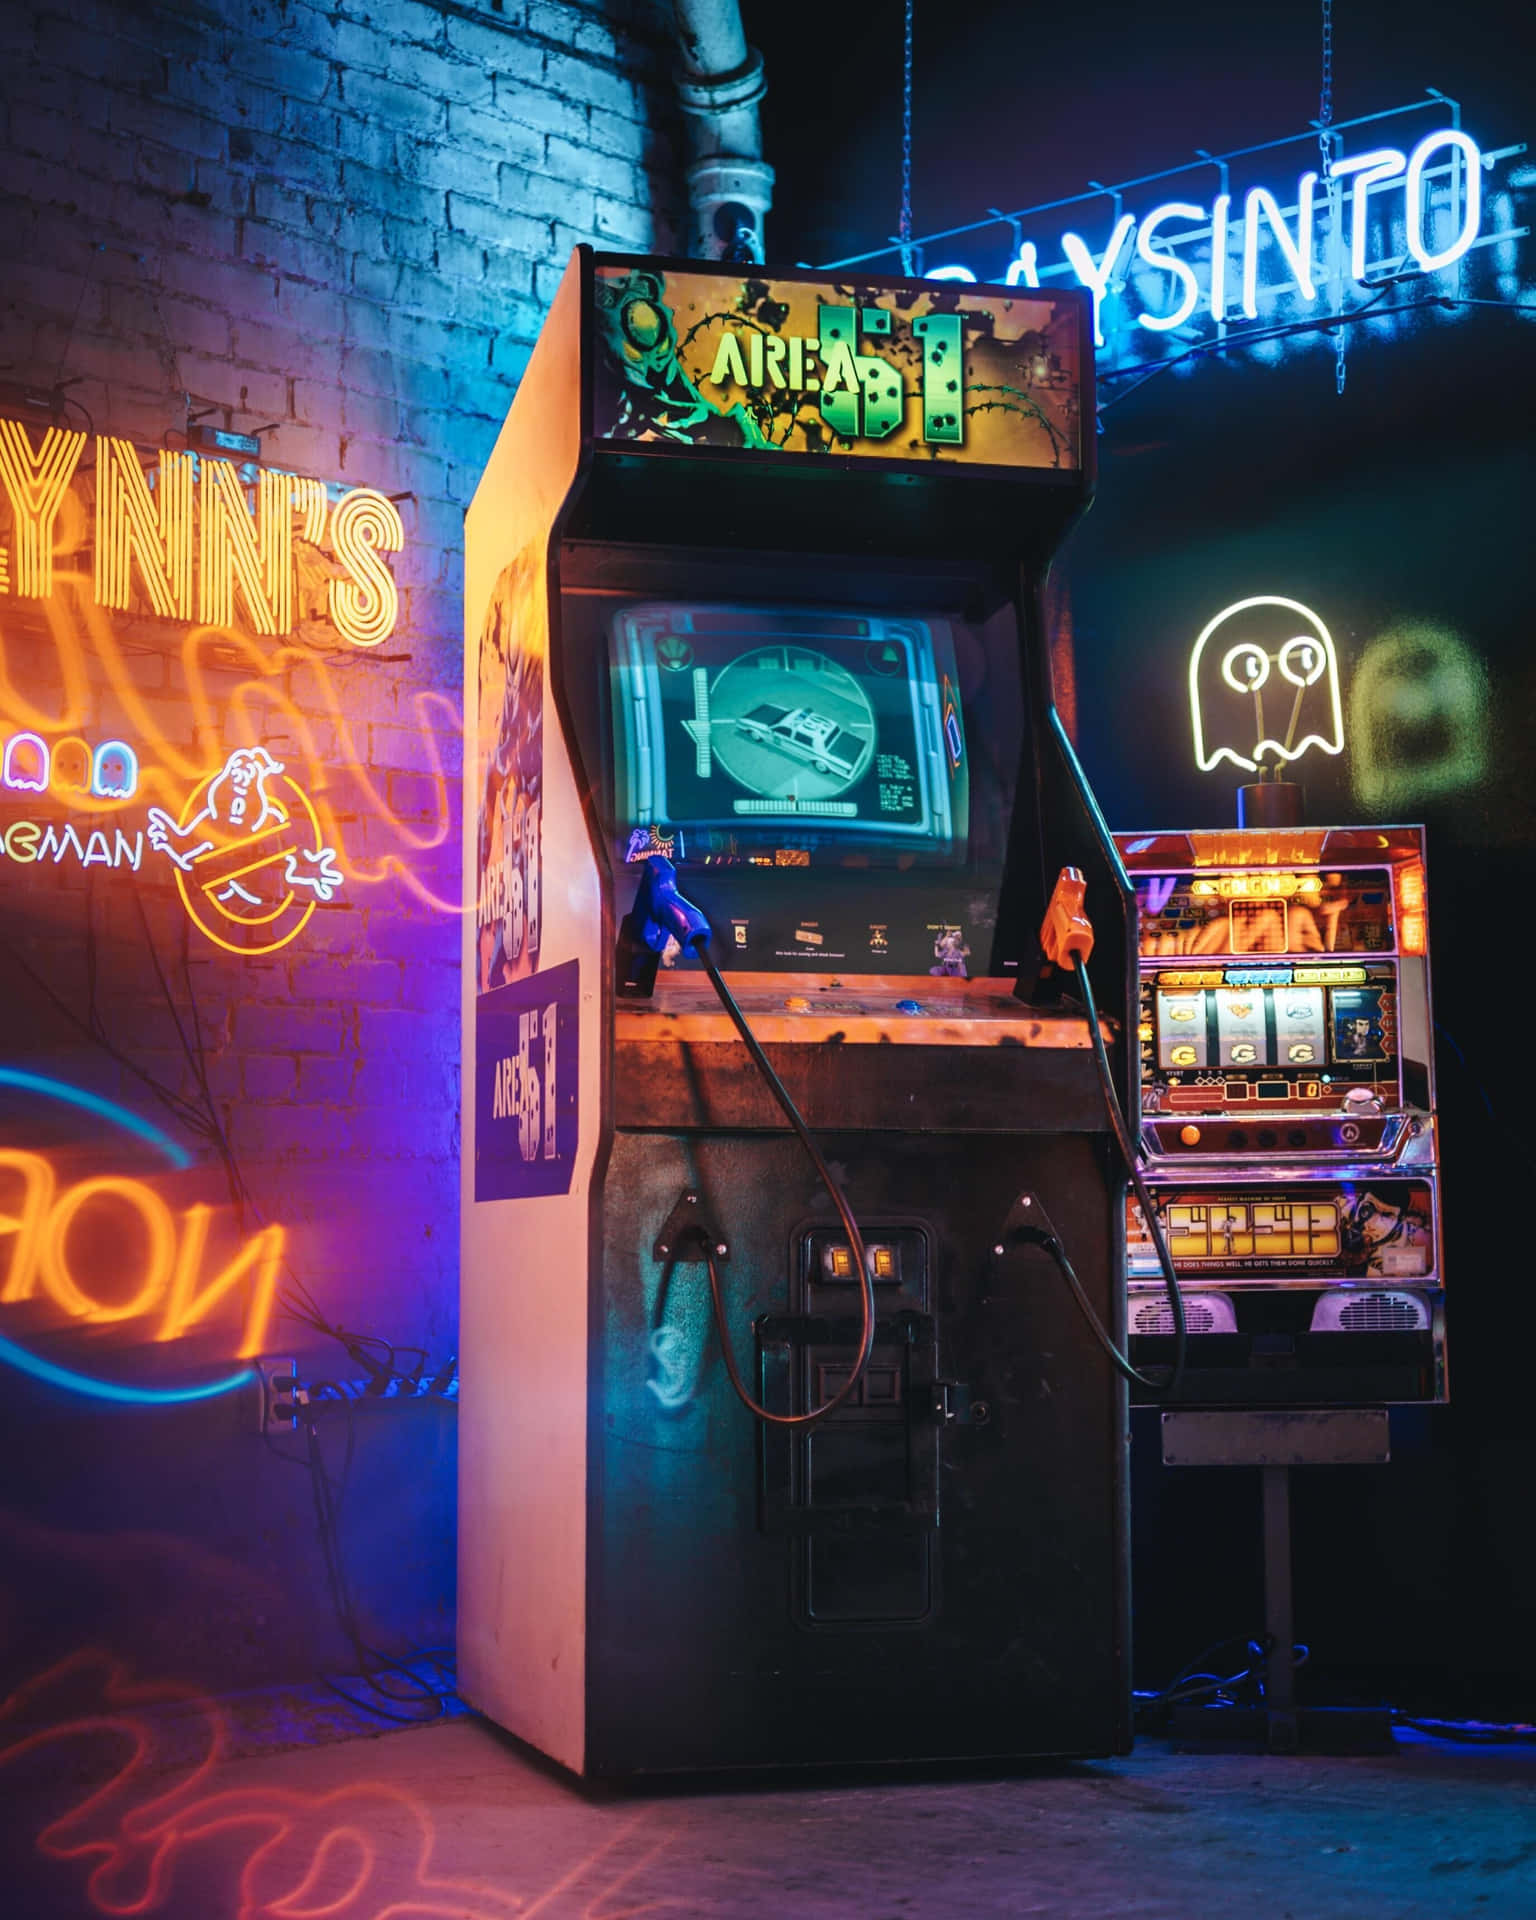 Immerse yourself in the vibrancy of an arcade space Wallpaper